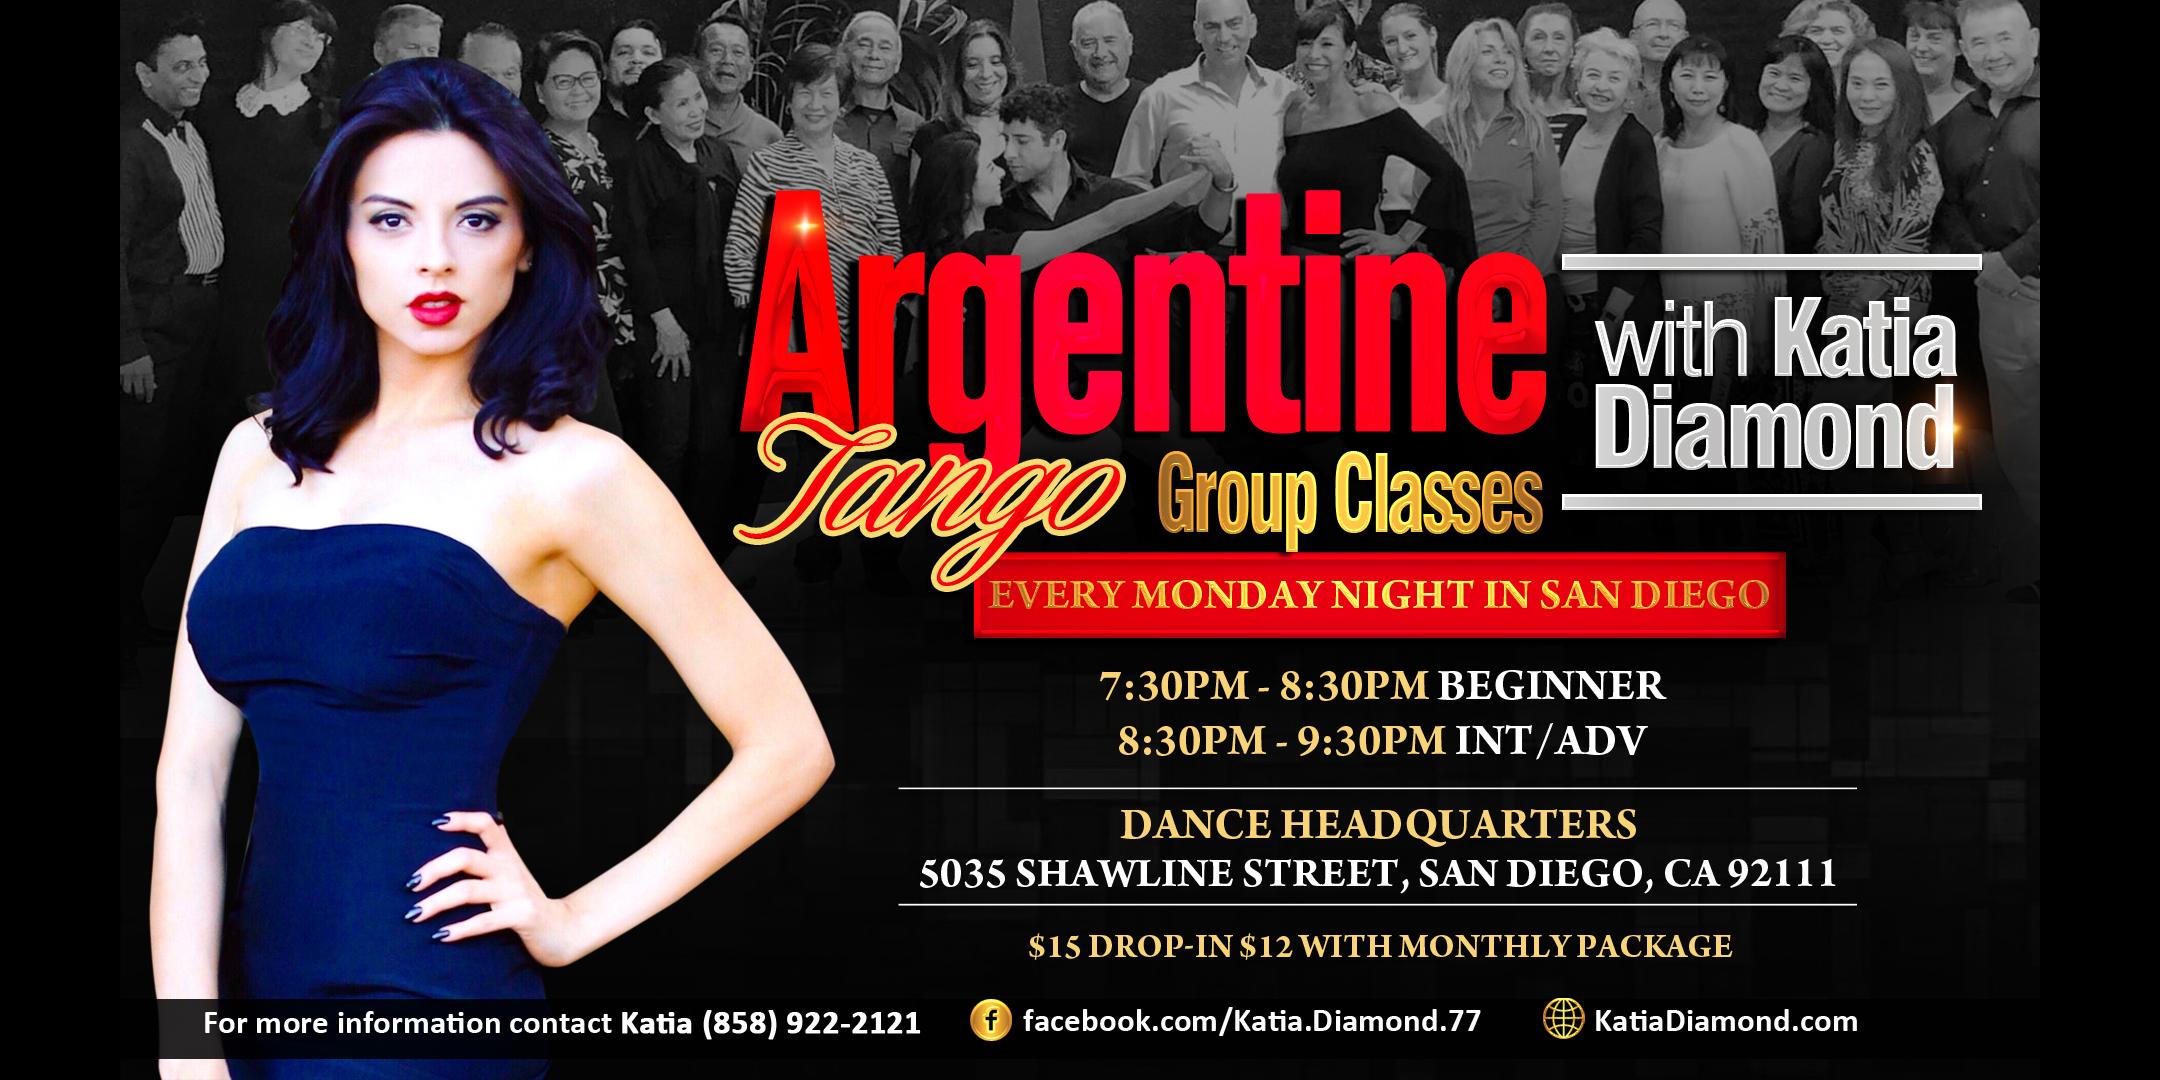 Argentine Tango Group Classes Every Monday with Katia Diamond in San Diego!